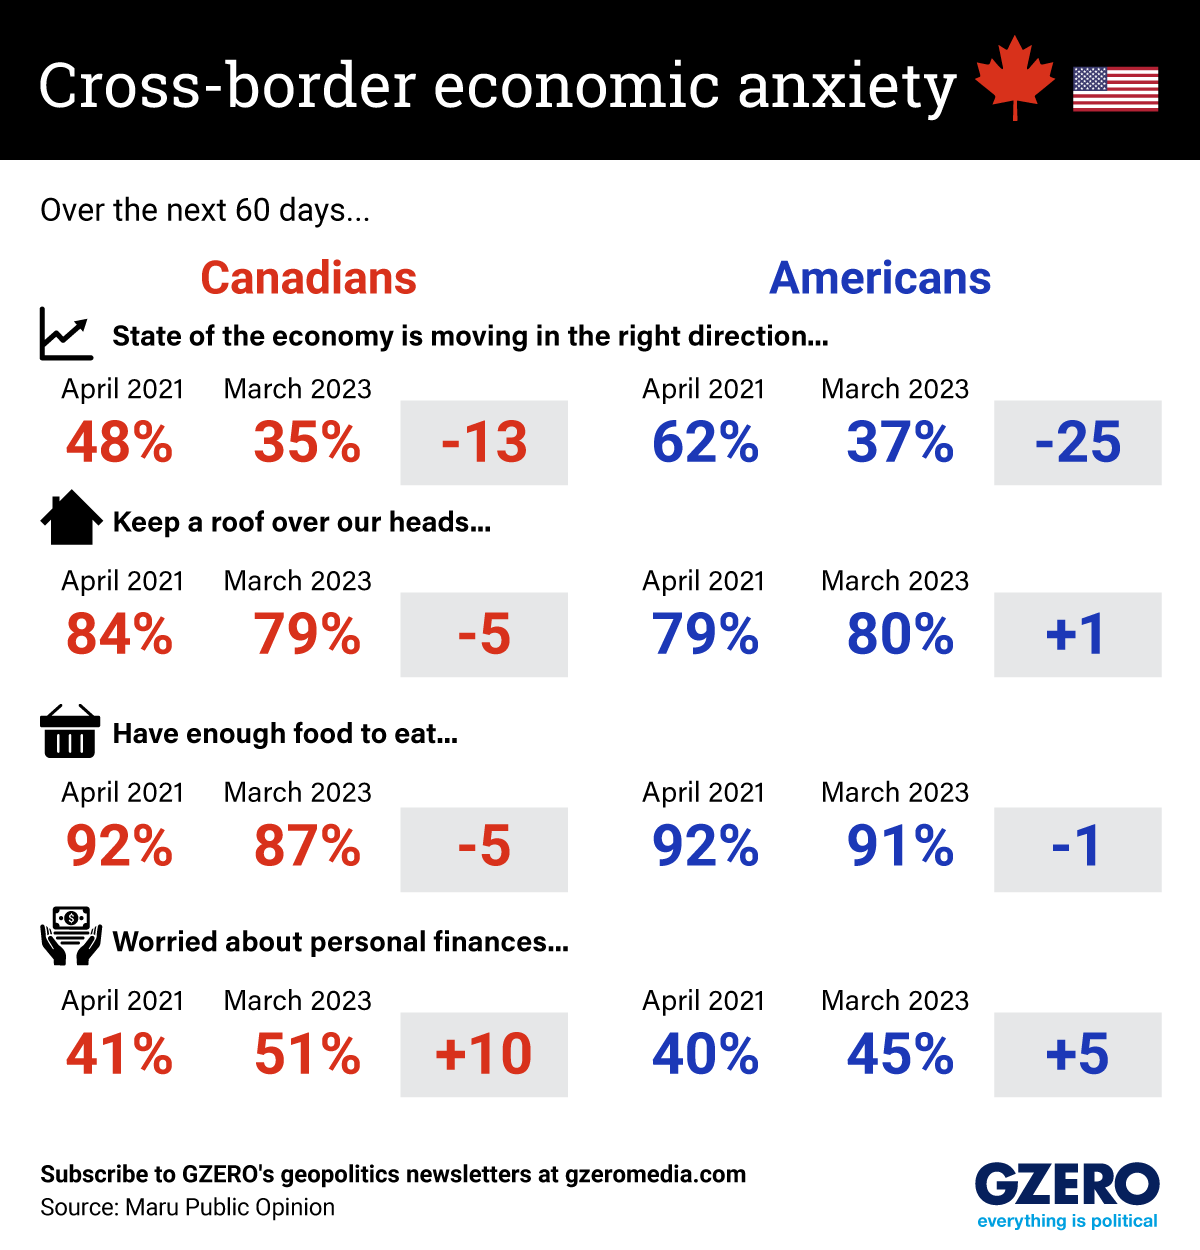 Maru polling data on Canadian and American views about the economy and their ability to make ends meet. ​